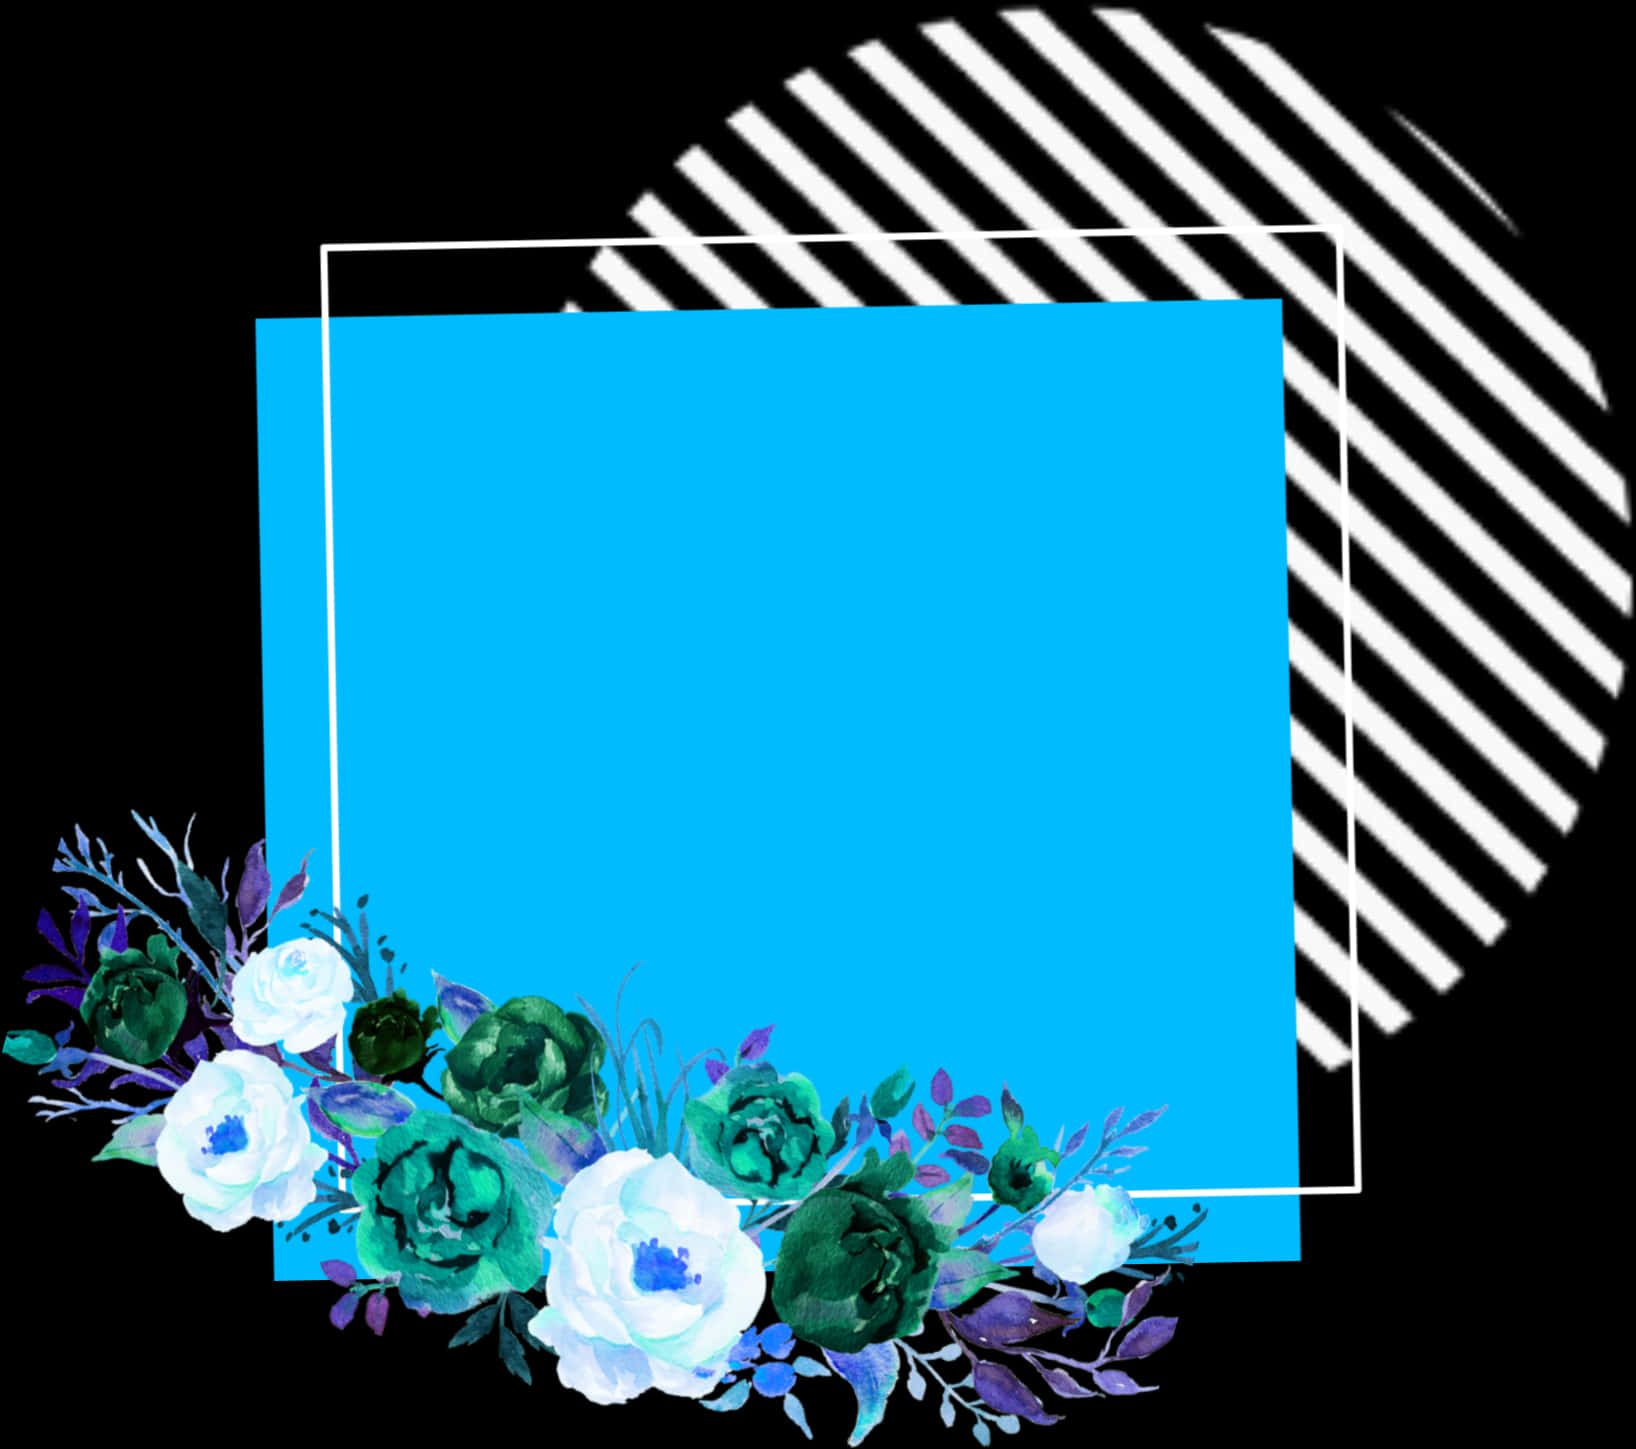 A Blue Square With White Flowers On It